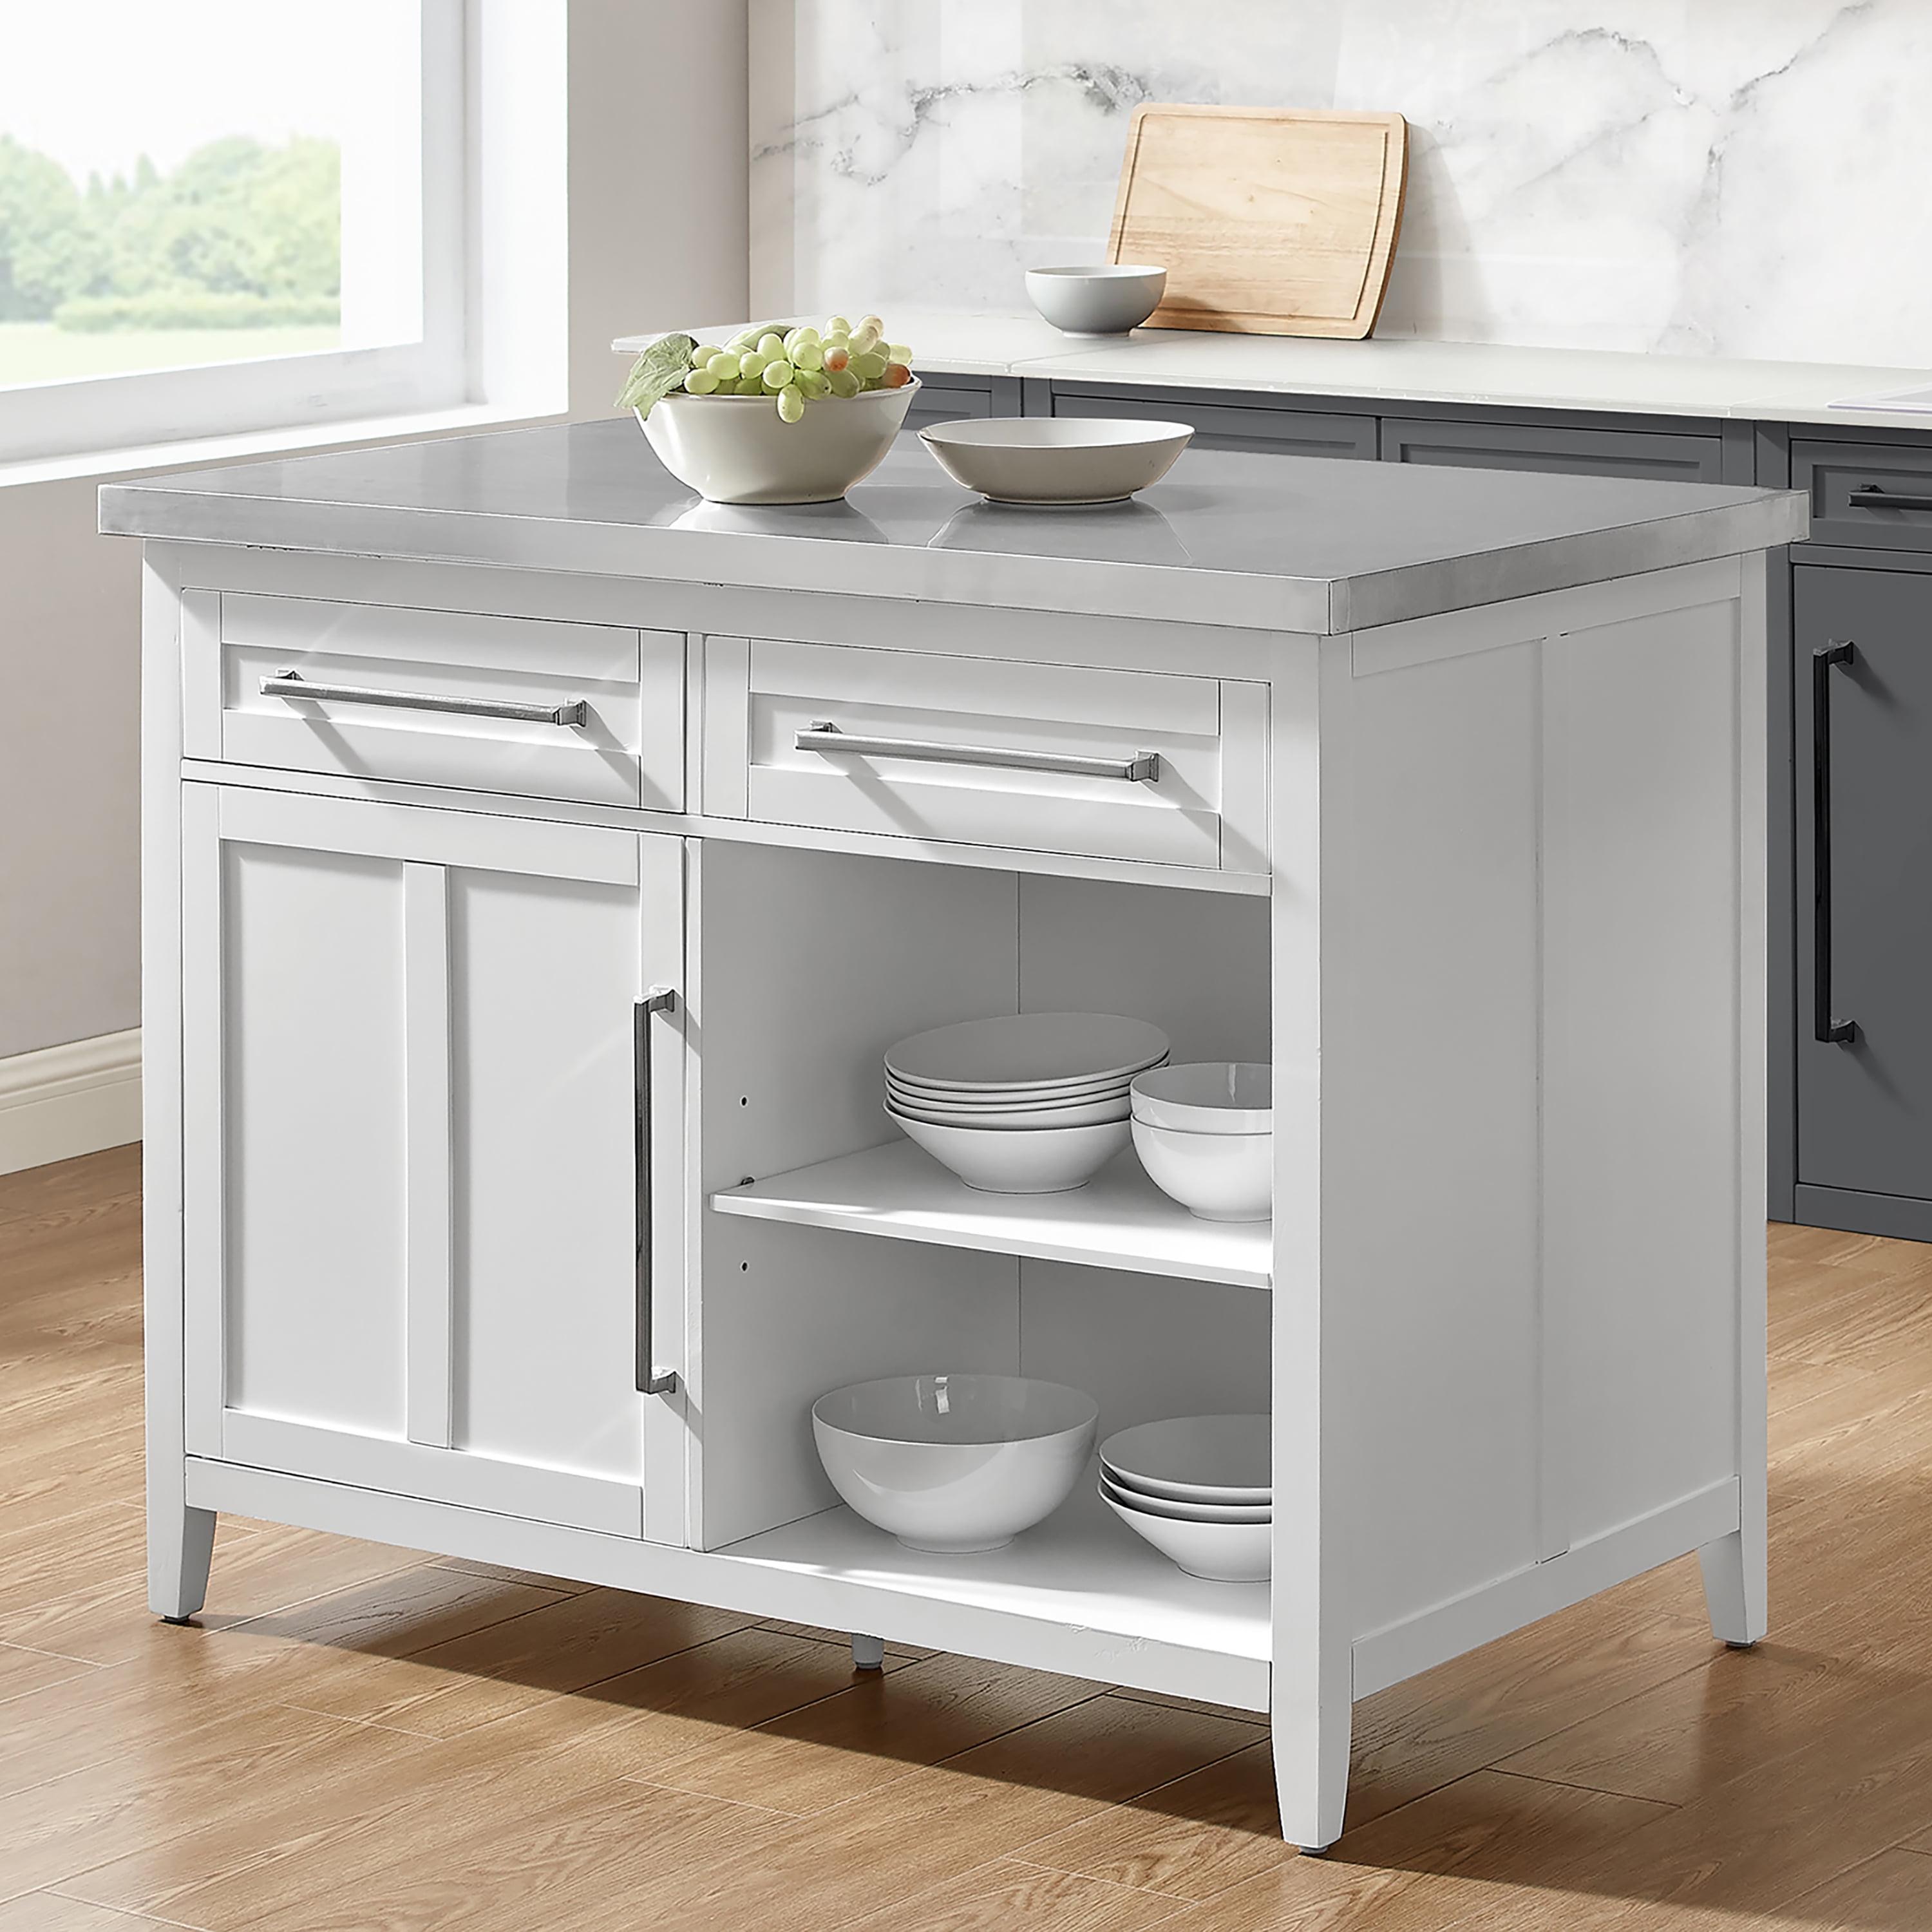 Silvia 51'' Classic White Kitchen Island with Stainless Steel Top